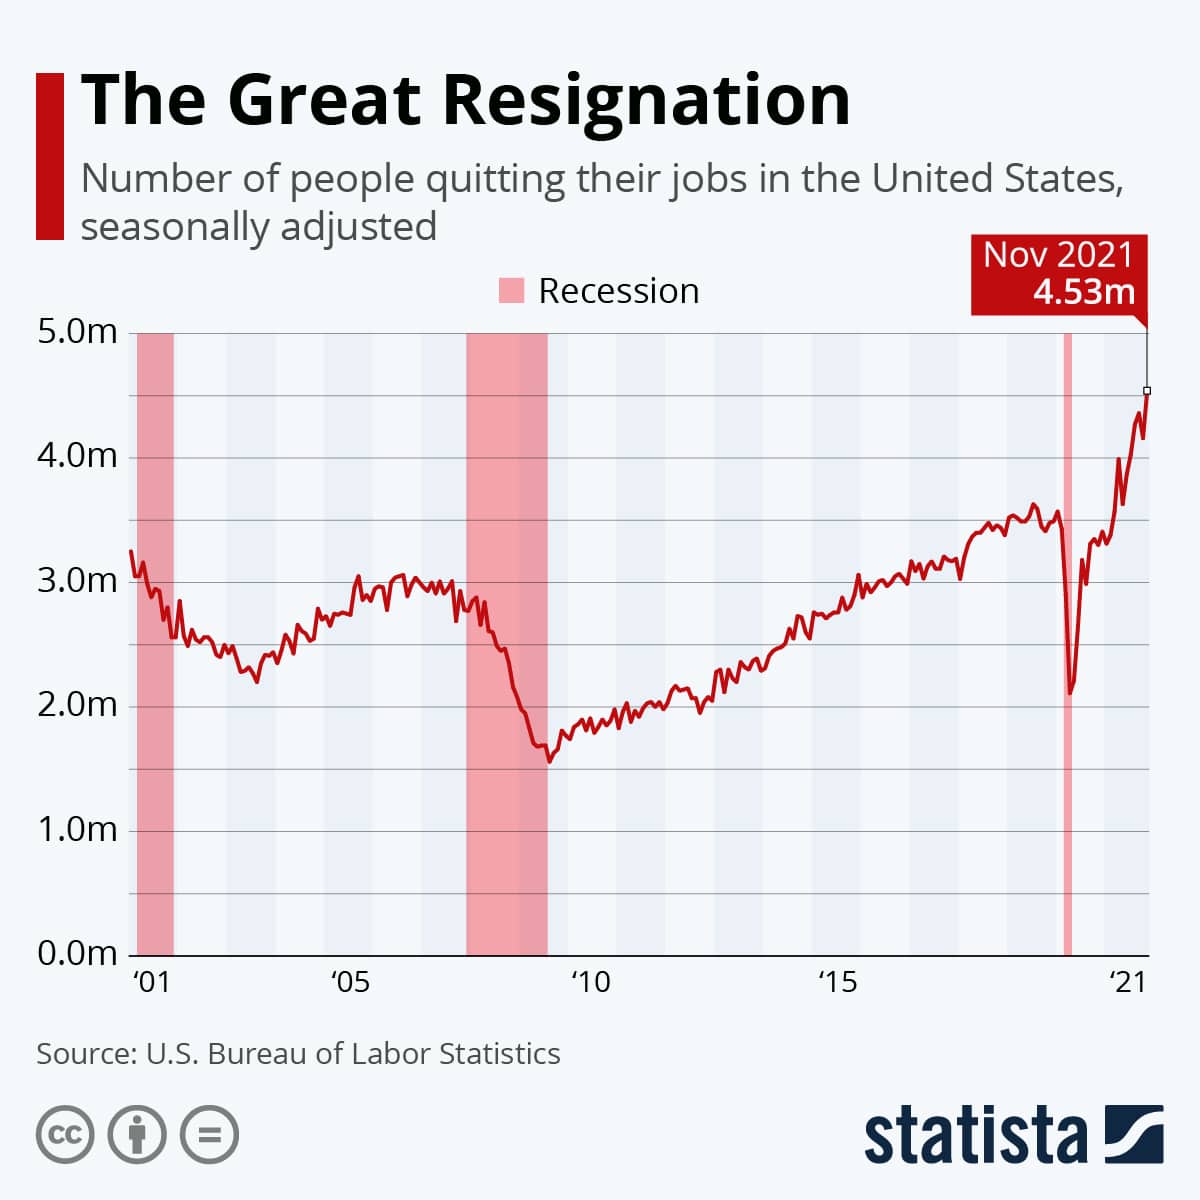 A Line Graph depicting the number of Americans quitting their jobs based on the US Bureau of Labor Statistics